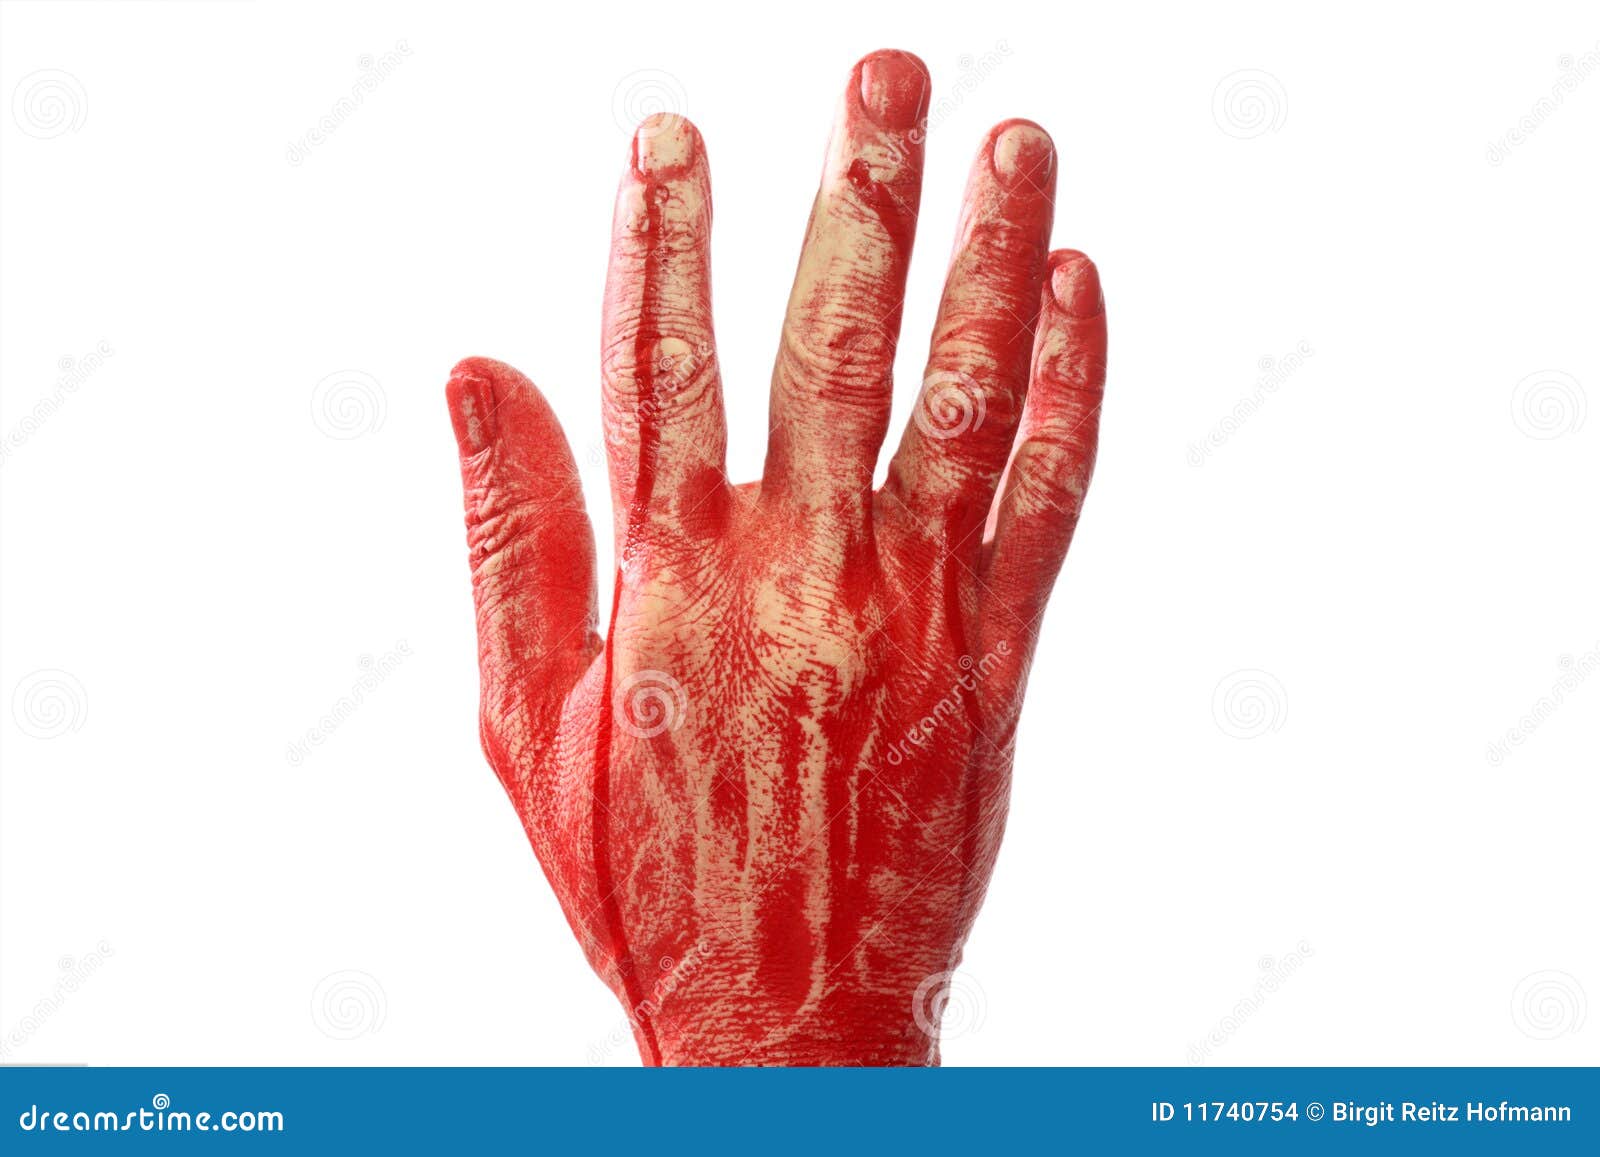 clipart bloody hand - photo #45